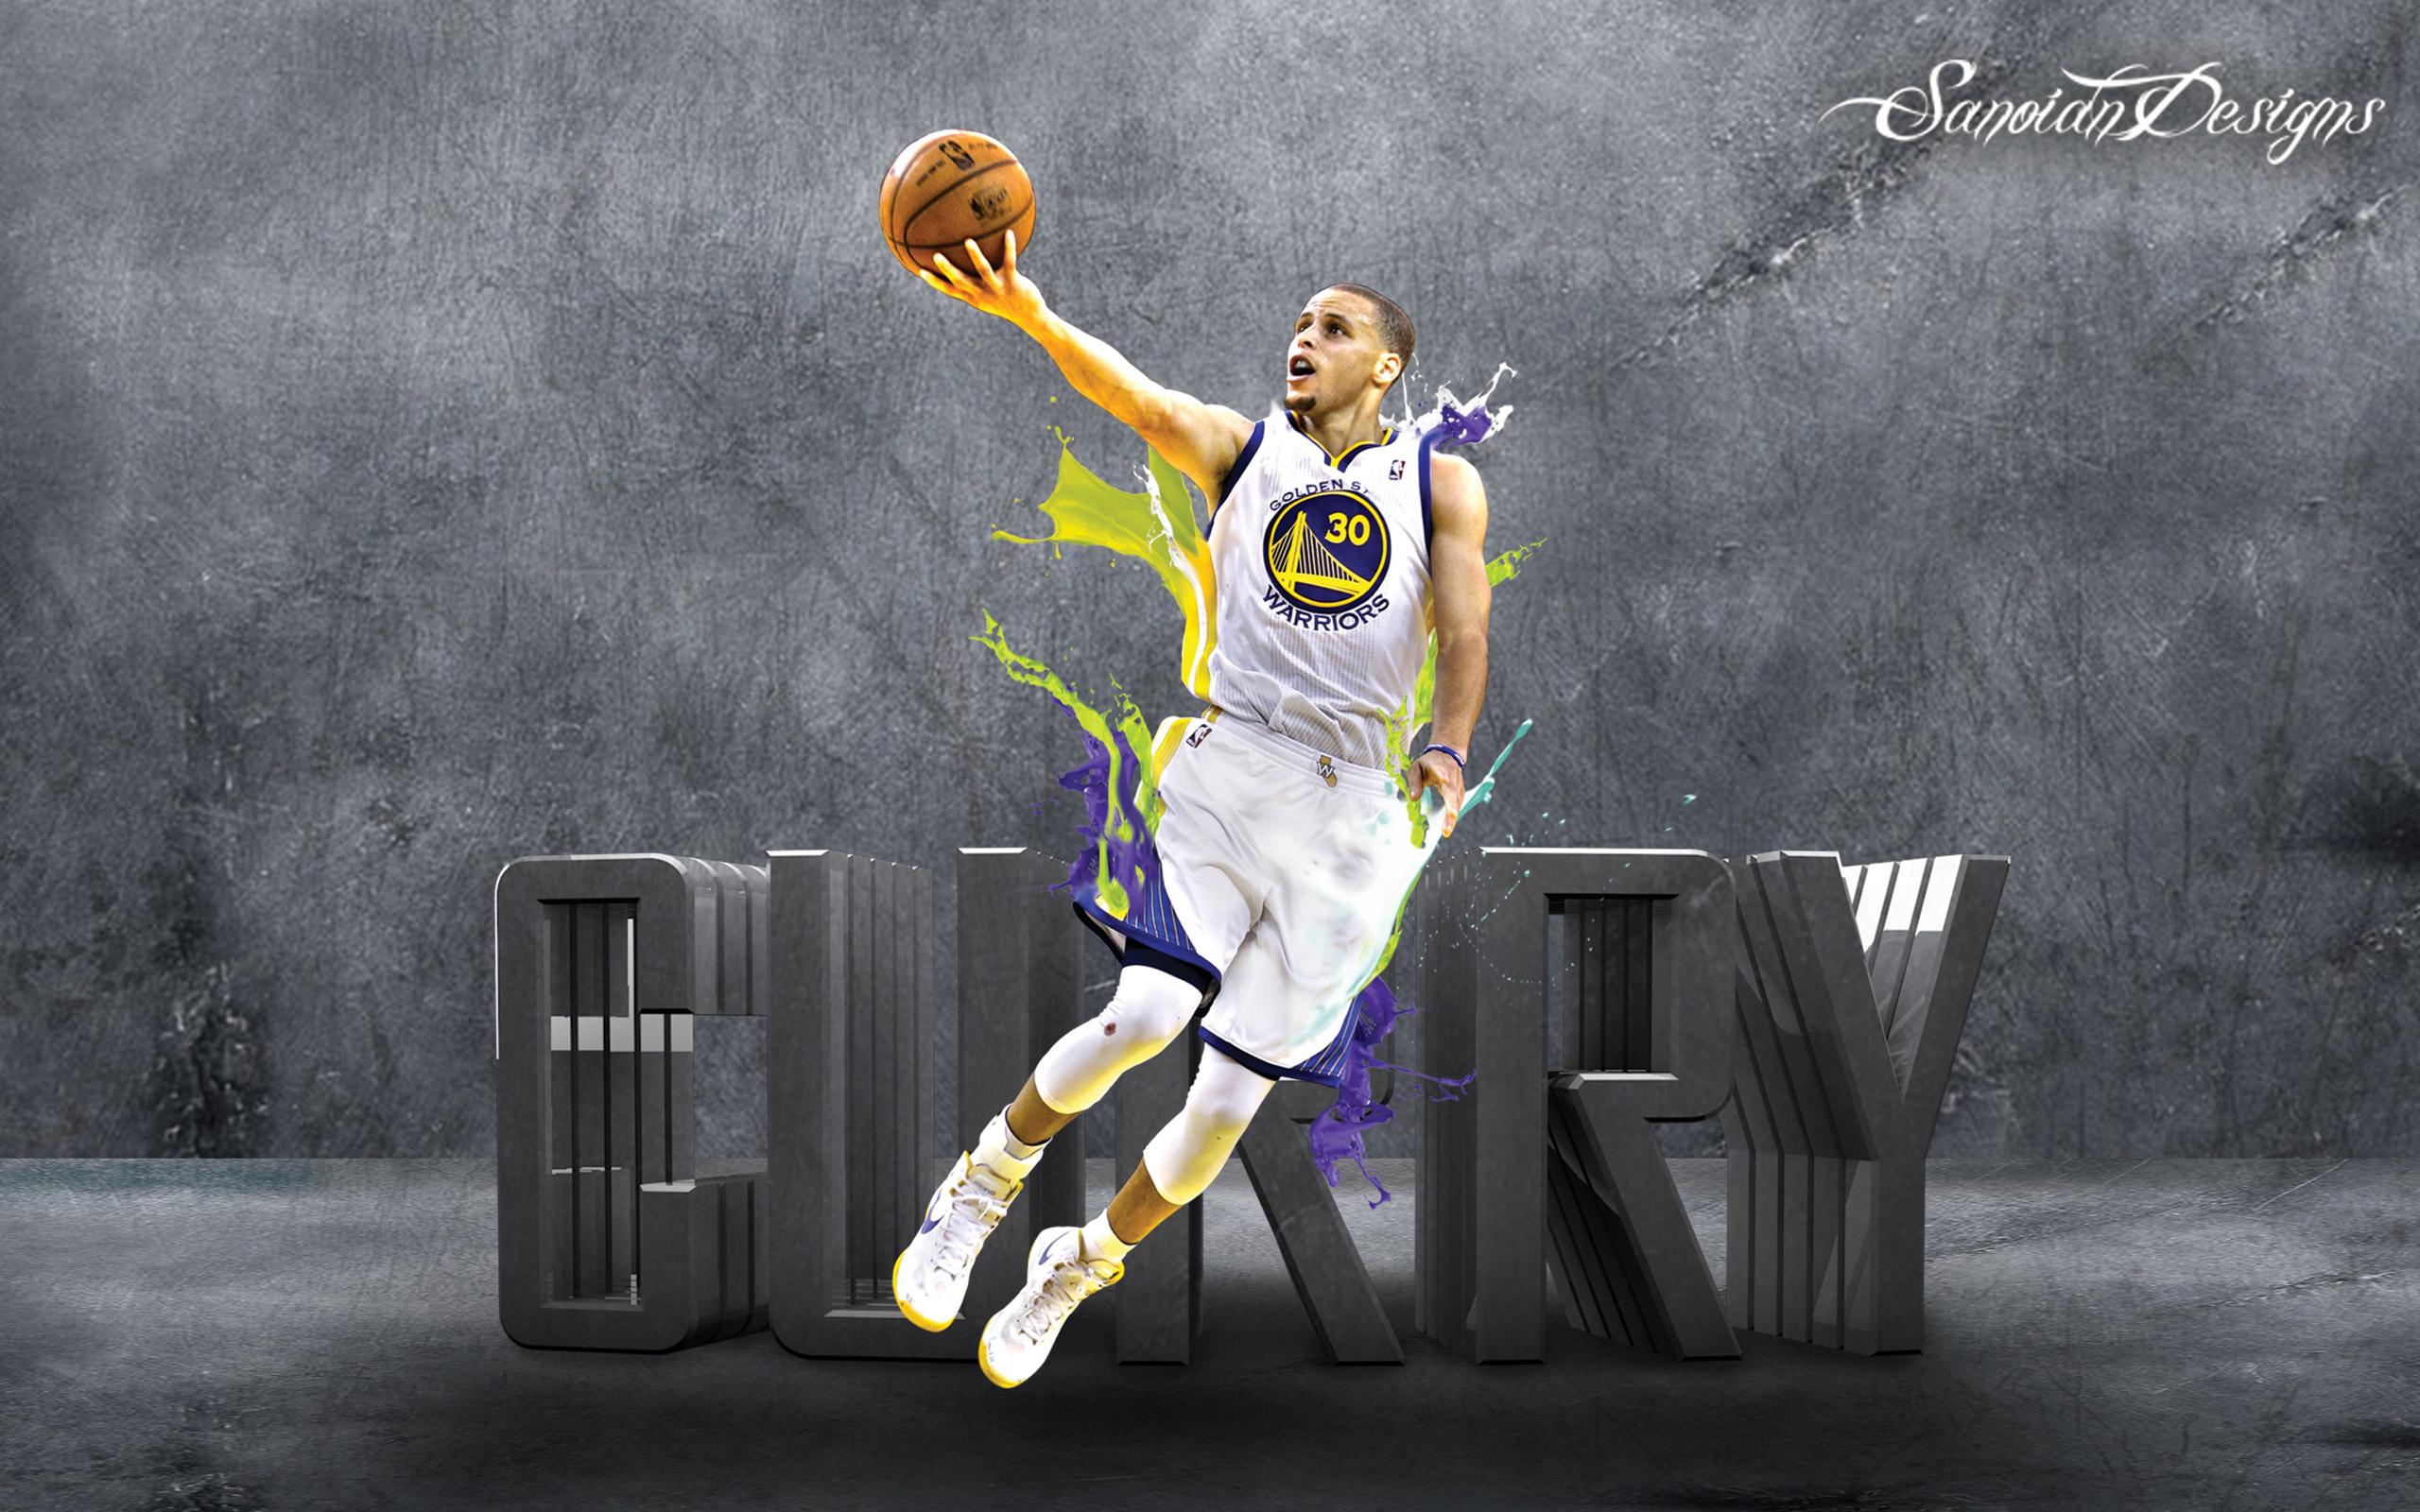 Latest Stephen Curry Wallpaper 2018 For Desktop, iPhone & Mobile